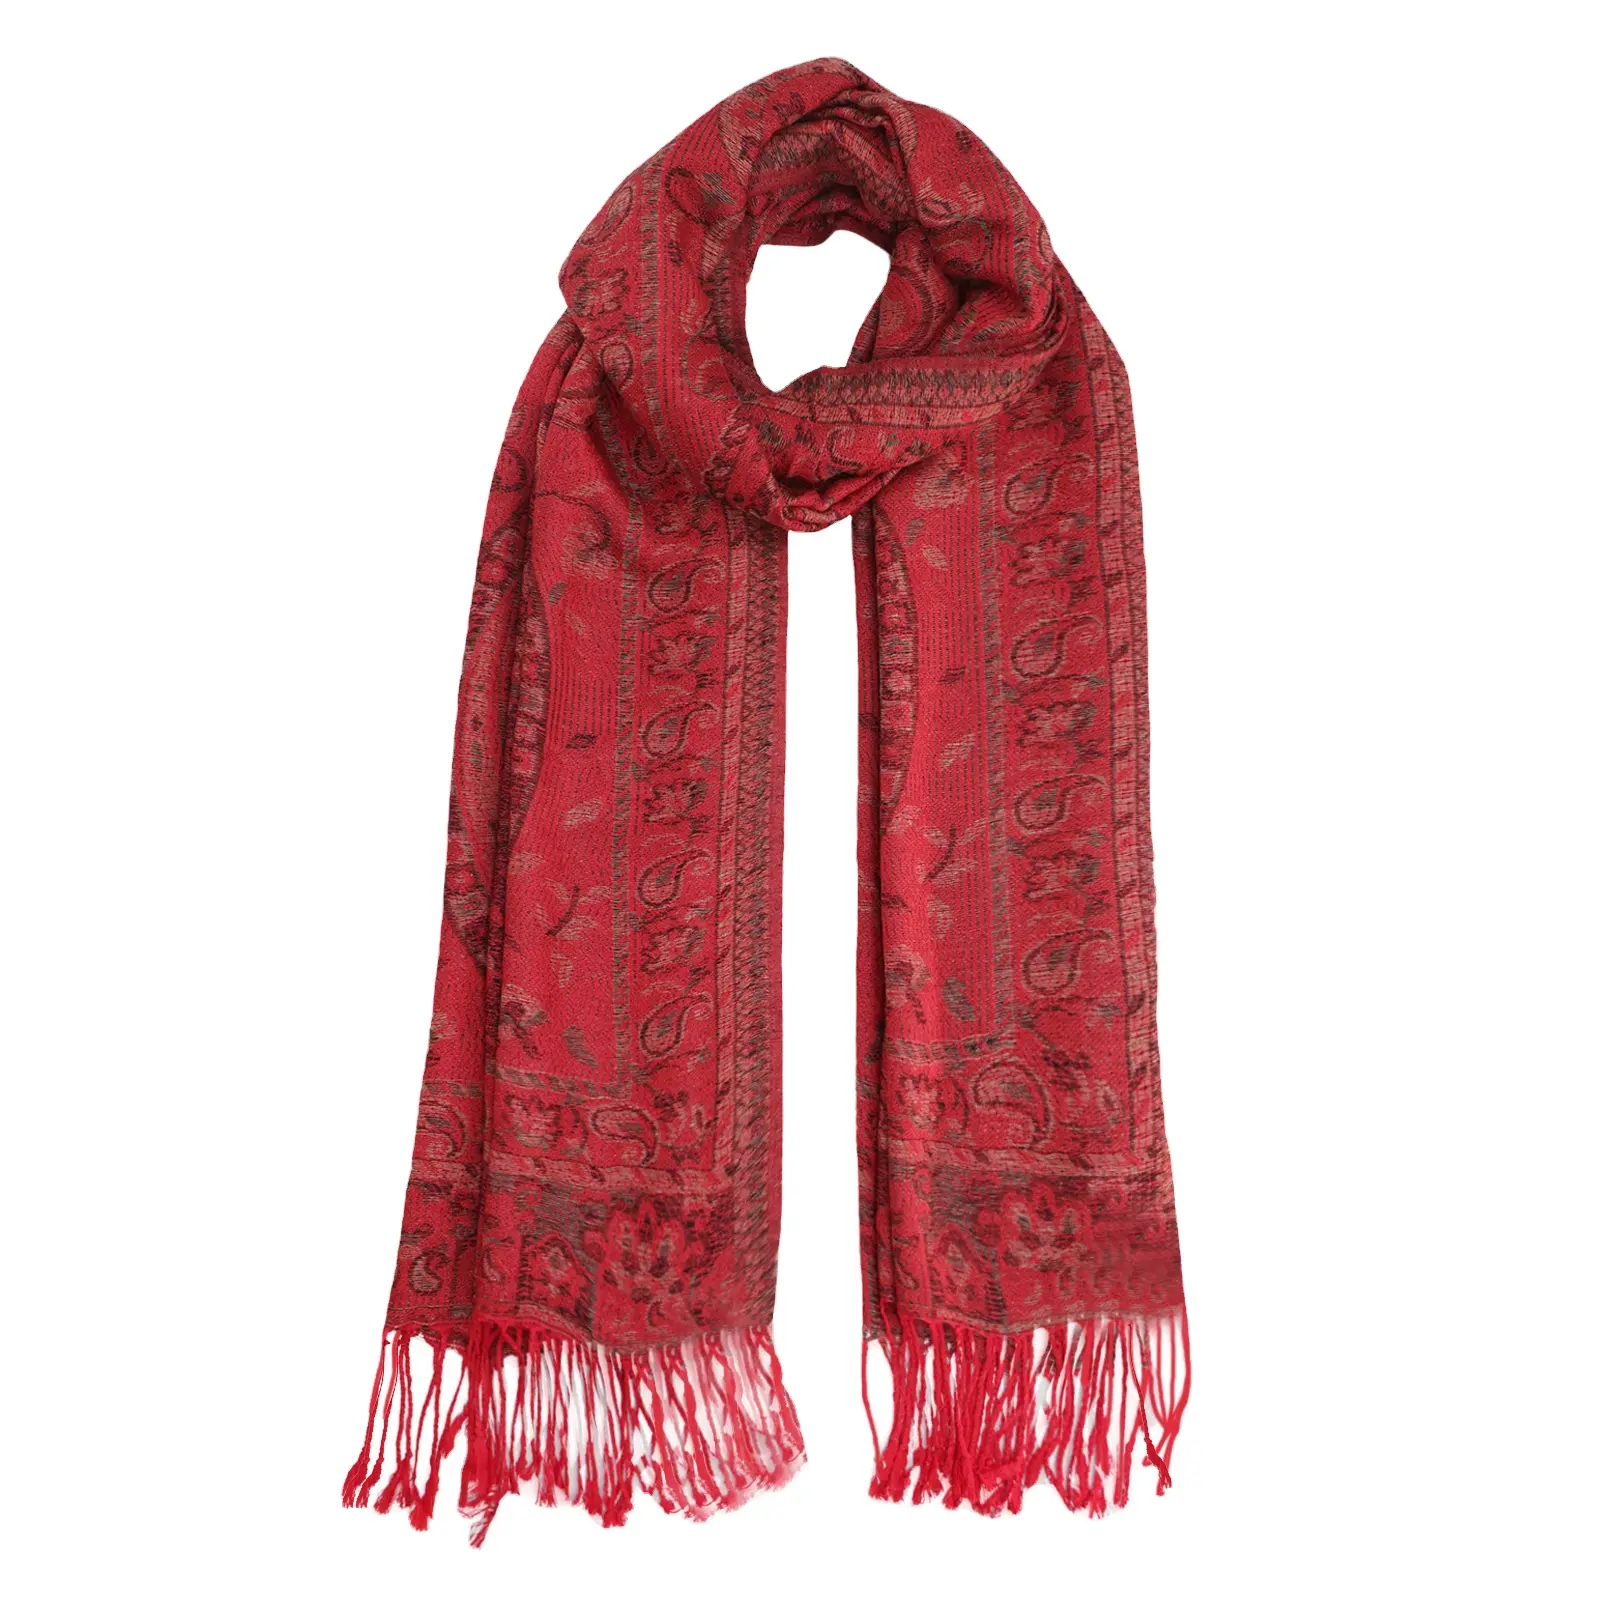 Customized Red Paisley Scarf soft Spring and Autumn embroidered Jacquard Paisley Pashmina women shawl scarf